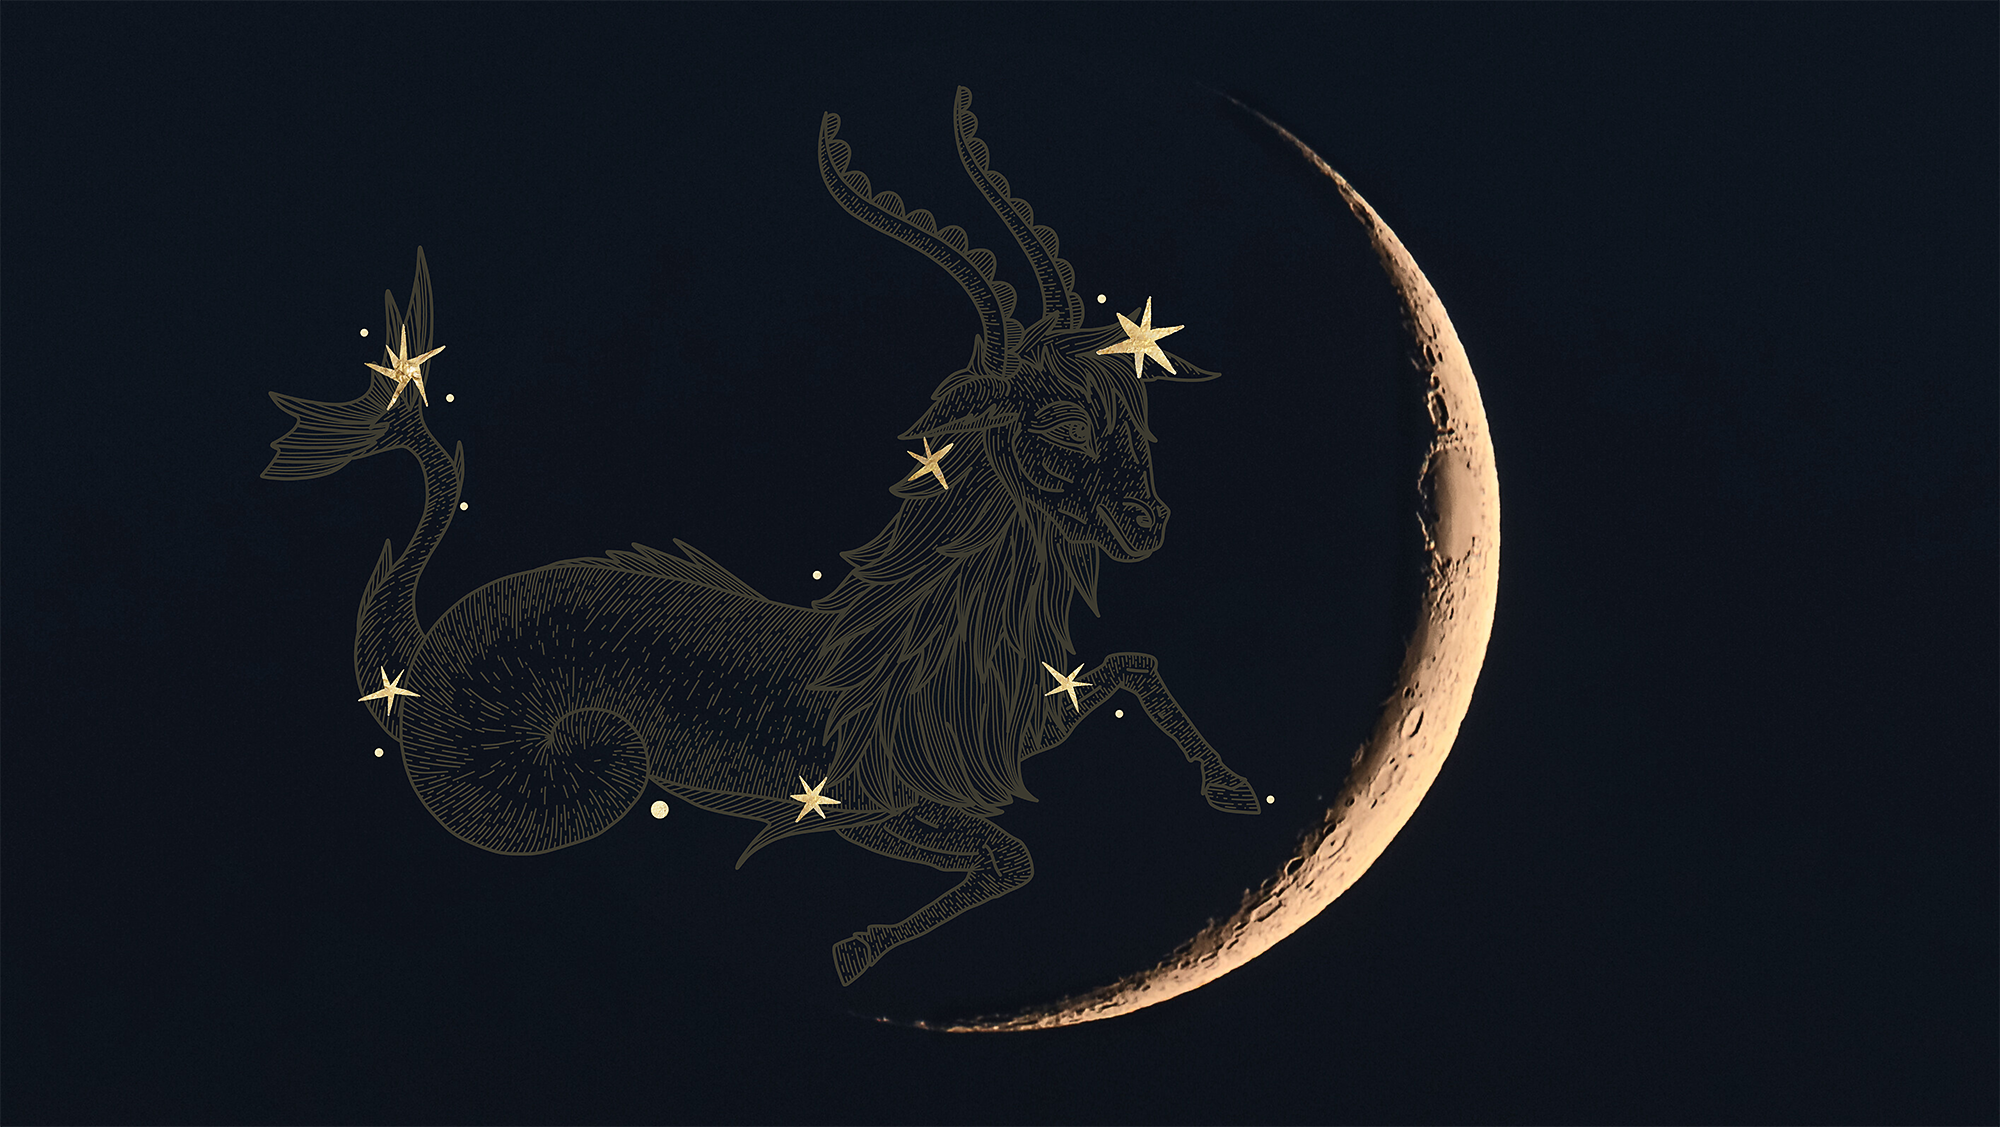 1/11 Portal: Harnessing the Energy of the January 11 New Moon in Capricorn